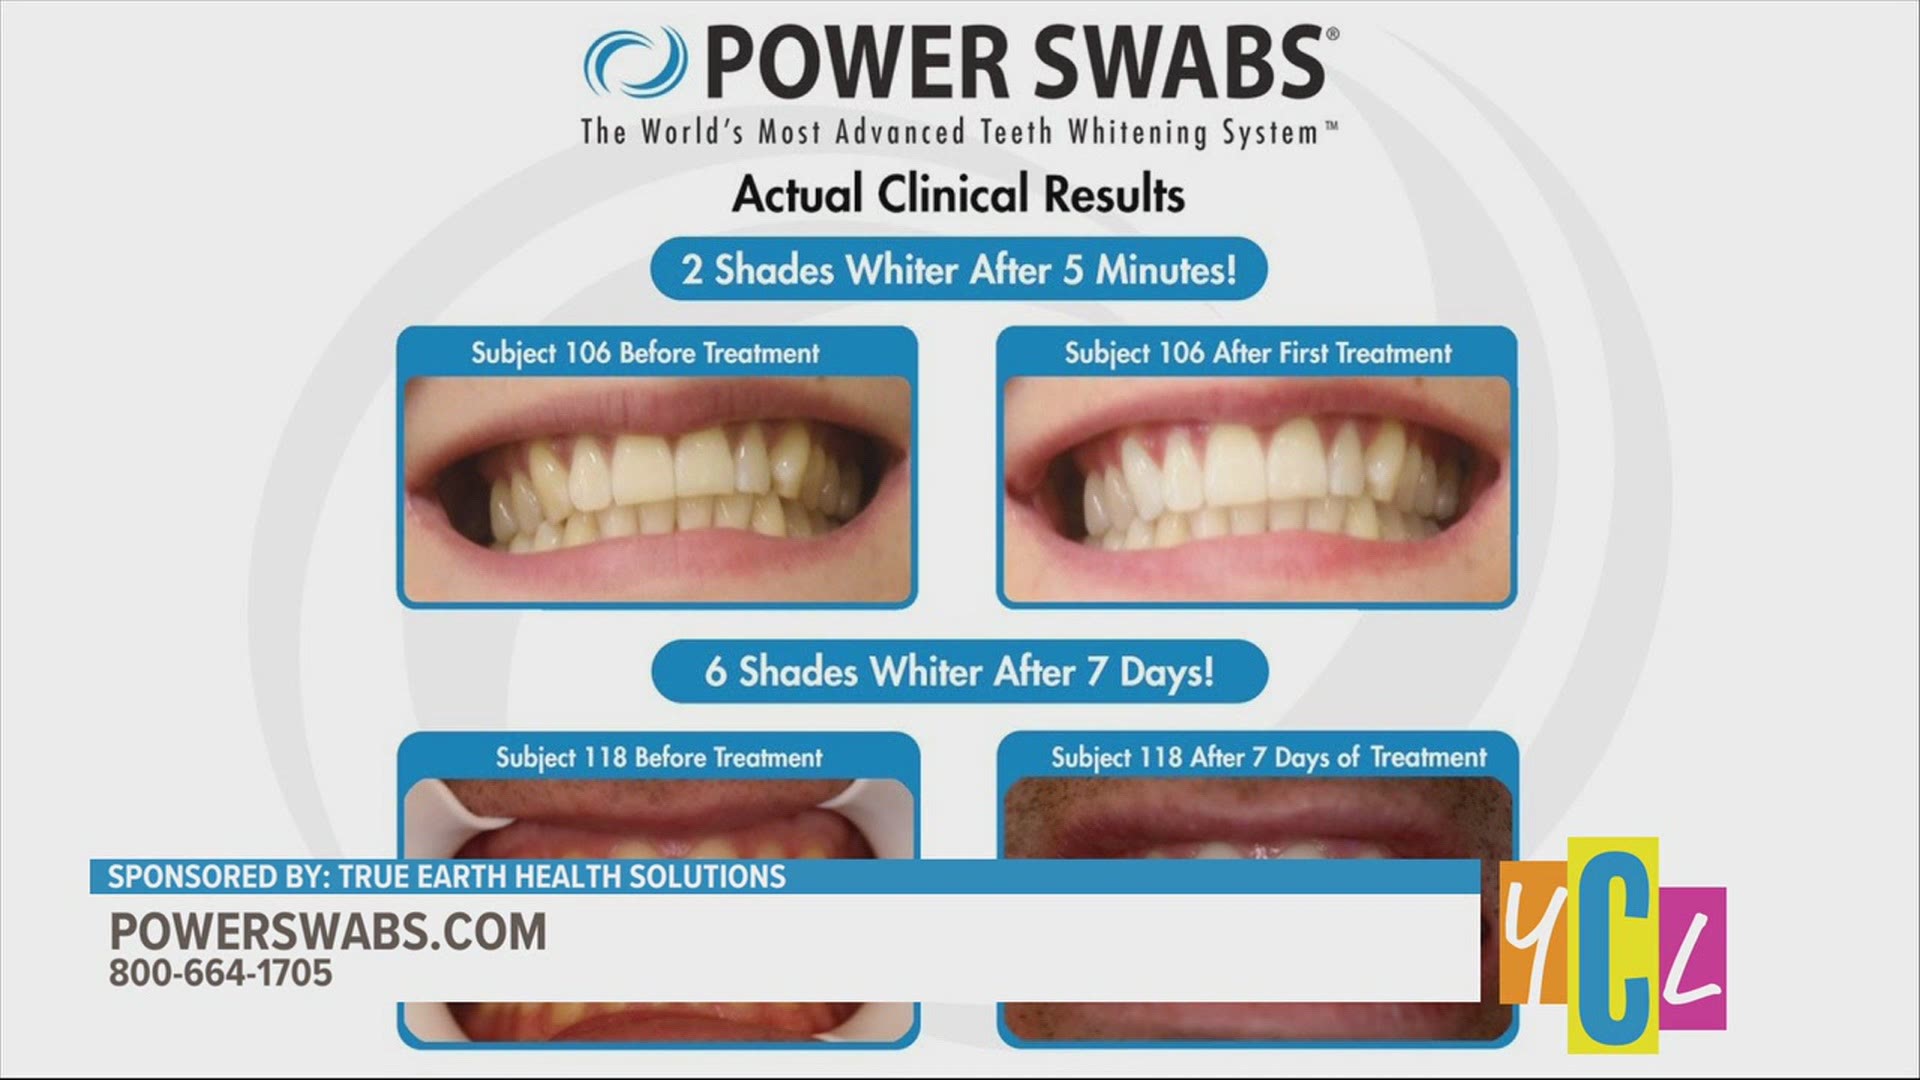 Show yourself some extra love by taking care of you. Check out how you could whiten your smile with Power Swabs. This segment paid for by True Earth Health Solutions